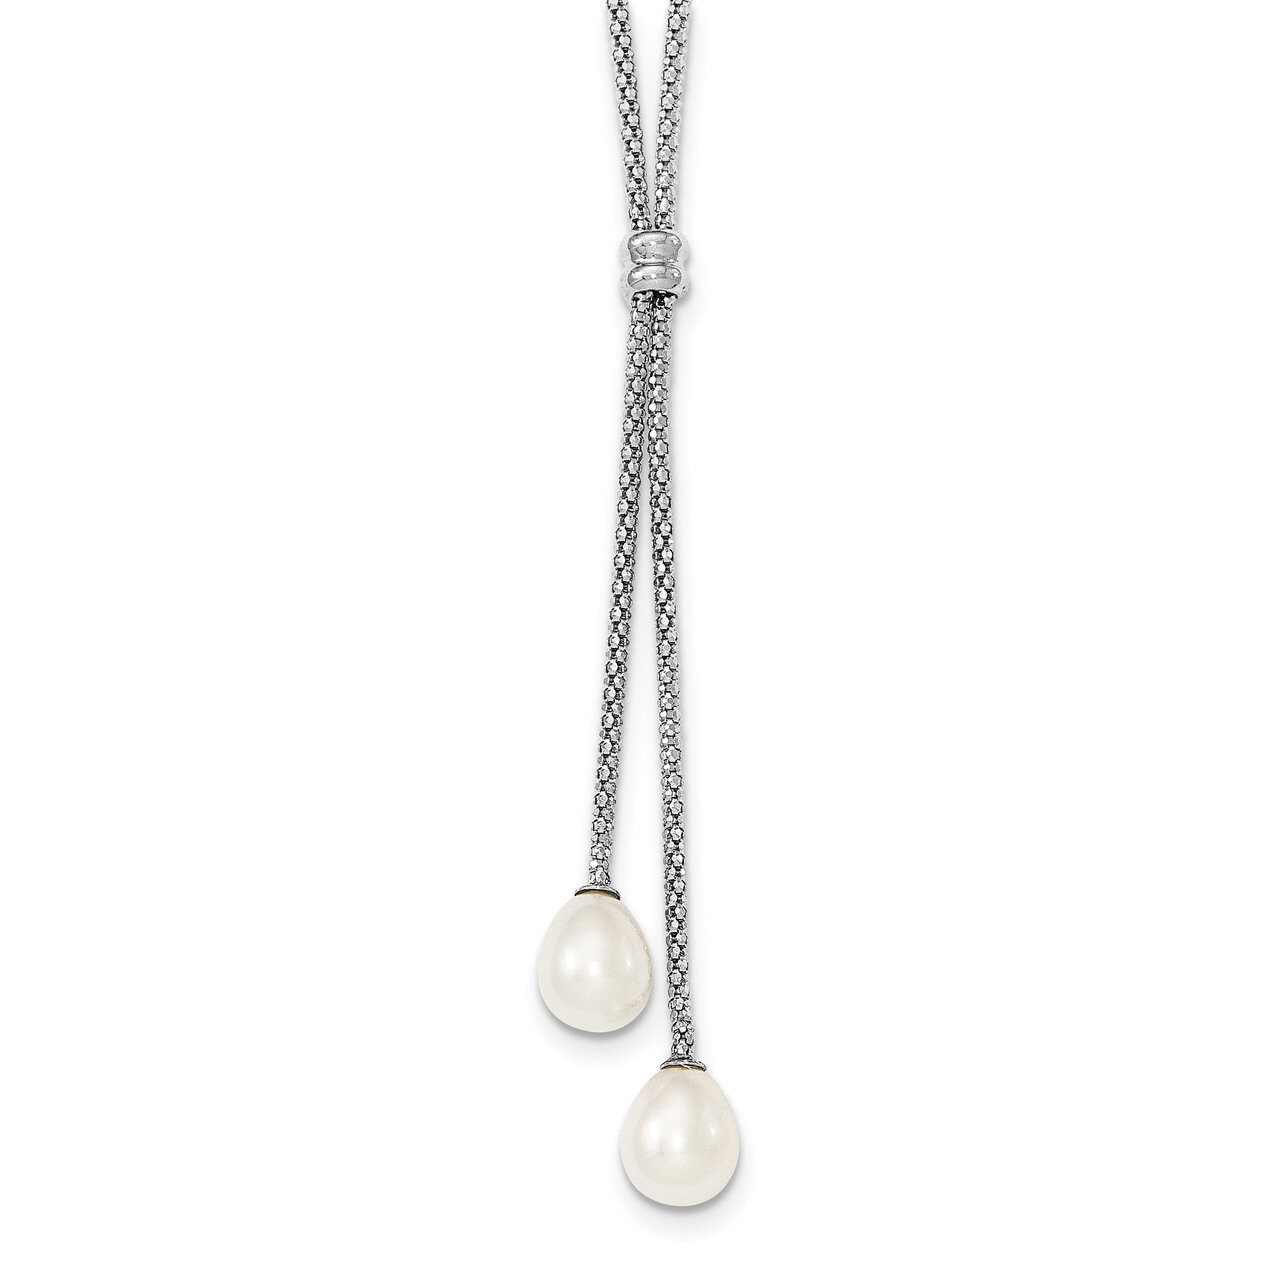 Bead and 7-8mm White Cultured Freshwater Pearl Dangle Necklace 16 Inch Sterling Silver Rhodium QG4137-16